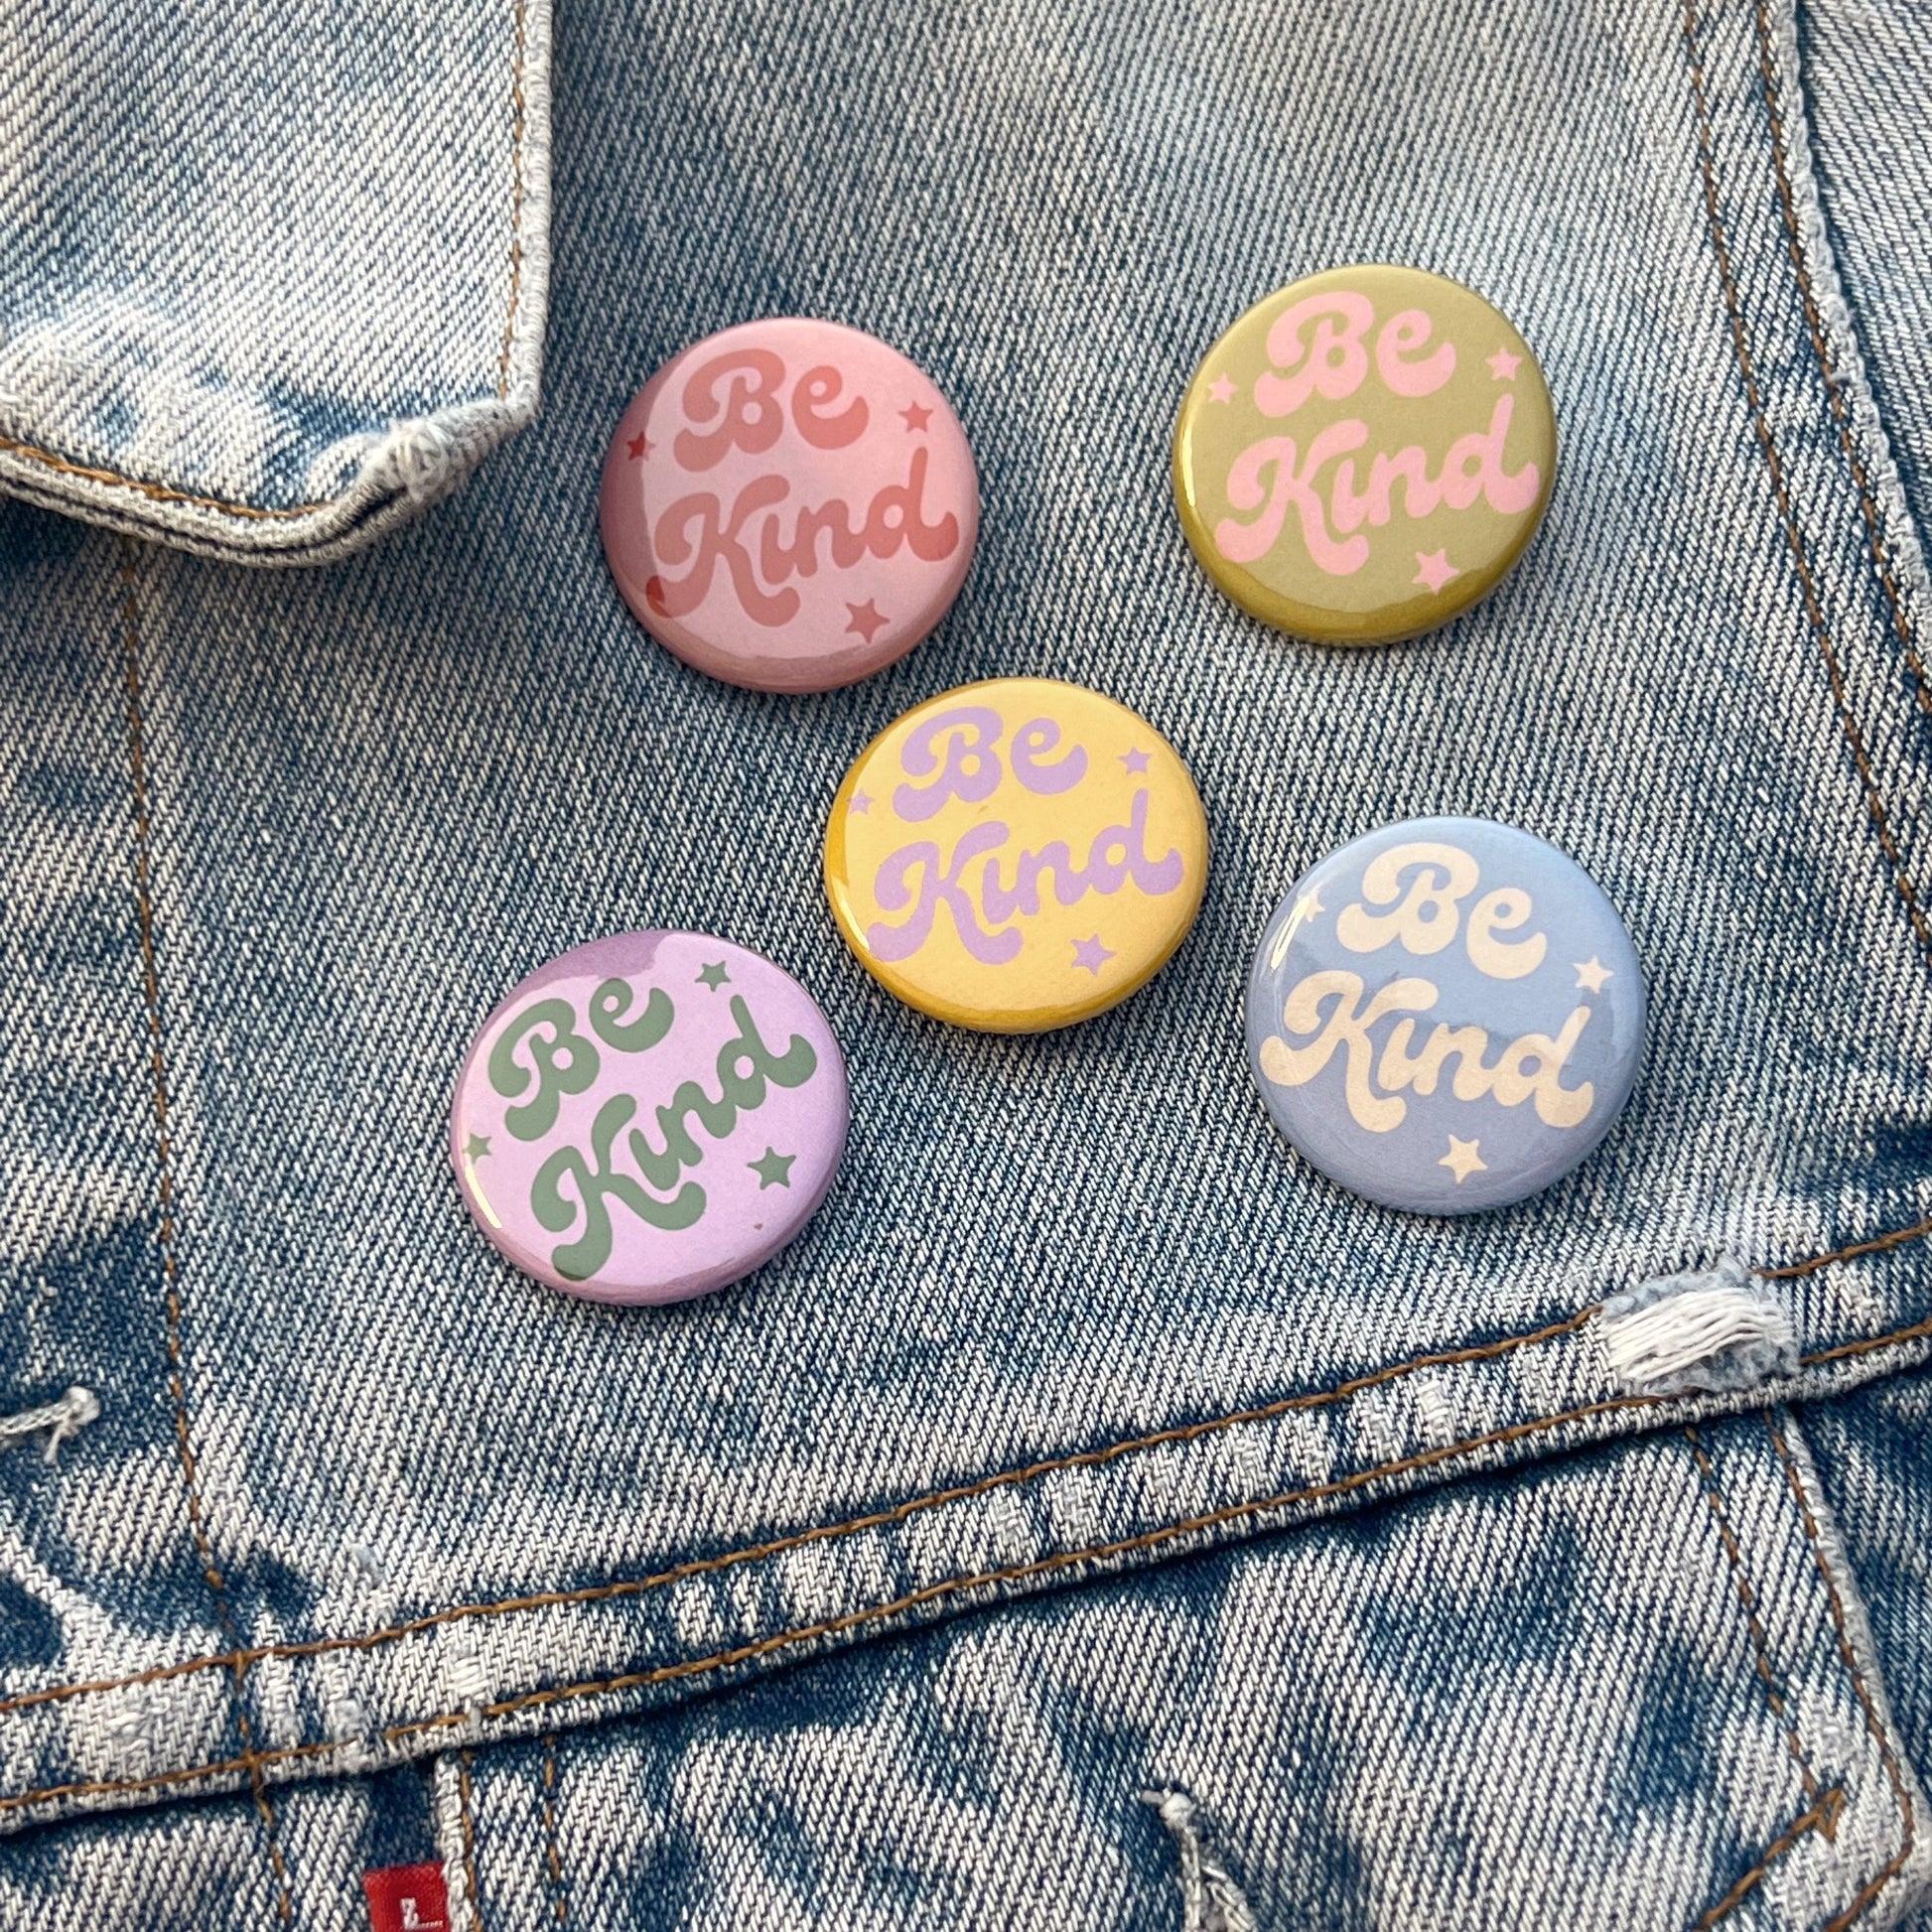 Pin on Buttons, Buttons!